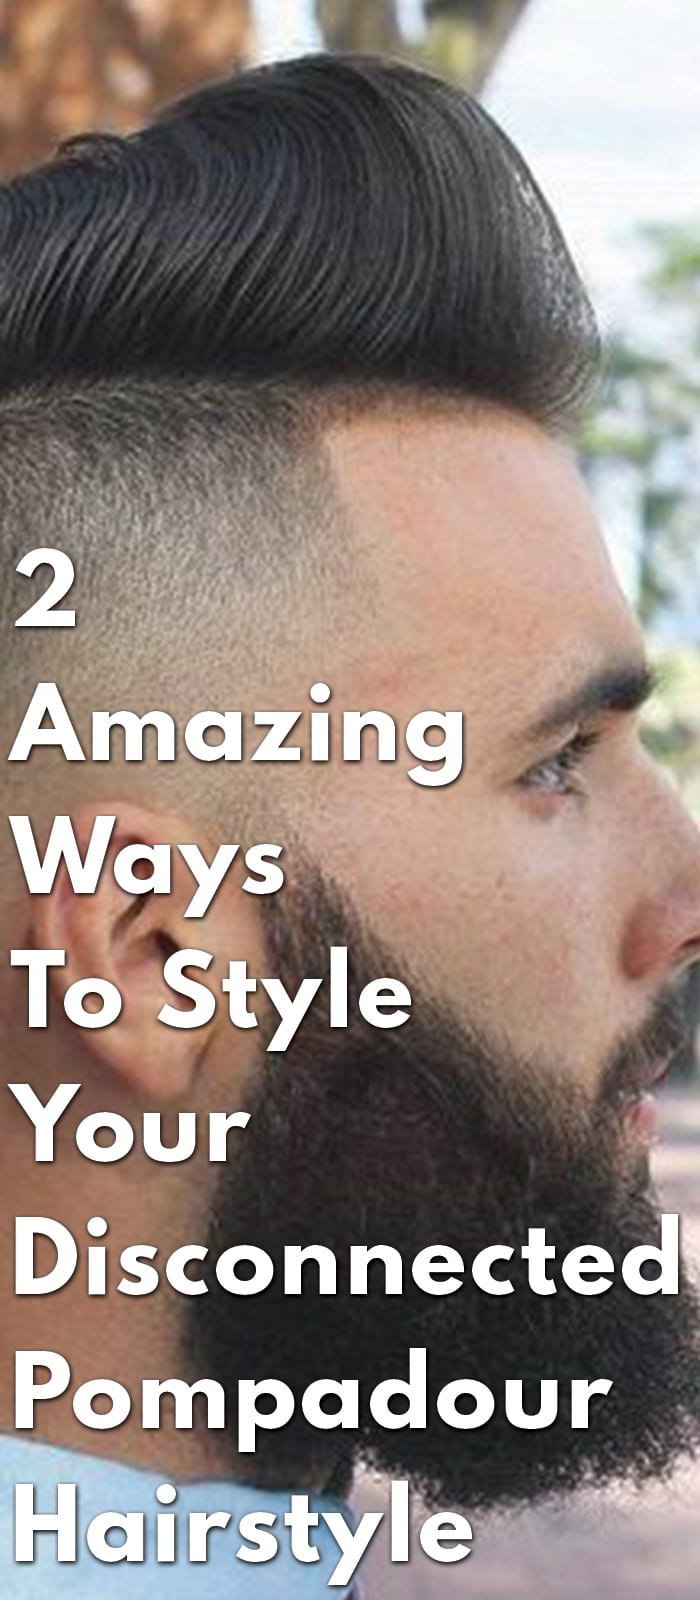 2 Amazing Ways To Style Your Disconnected Pompadour Hairstyle